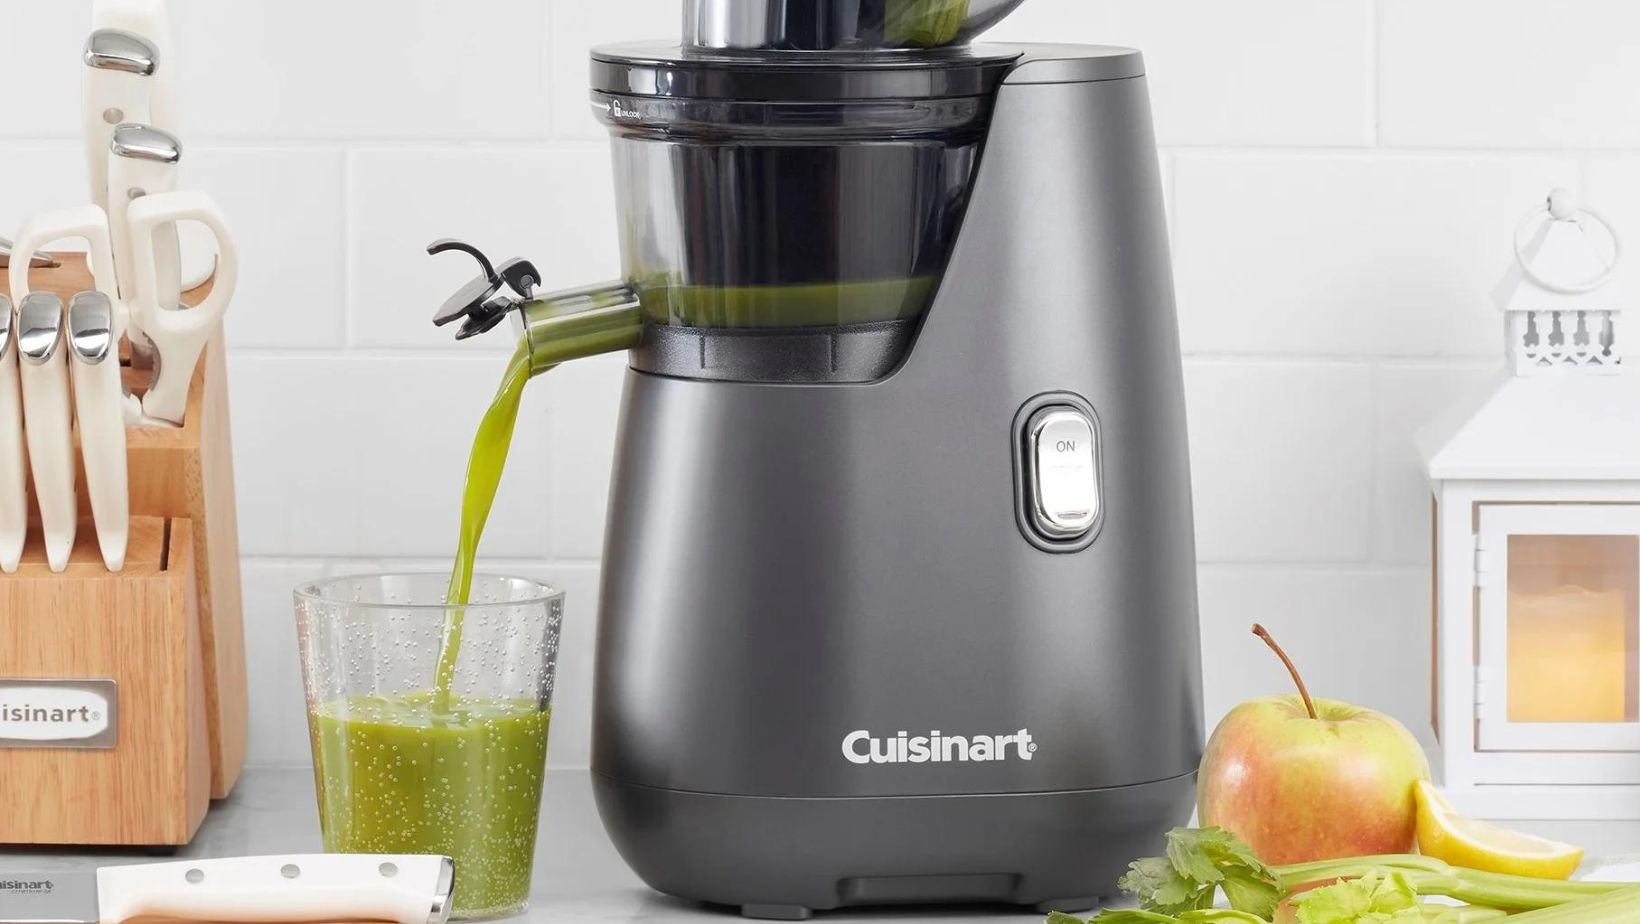 A Cuisinart Juicer that's producing green juice on a countertop